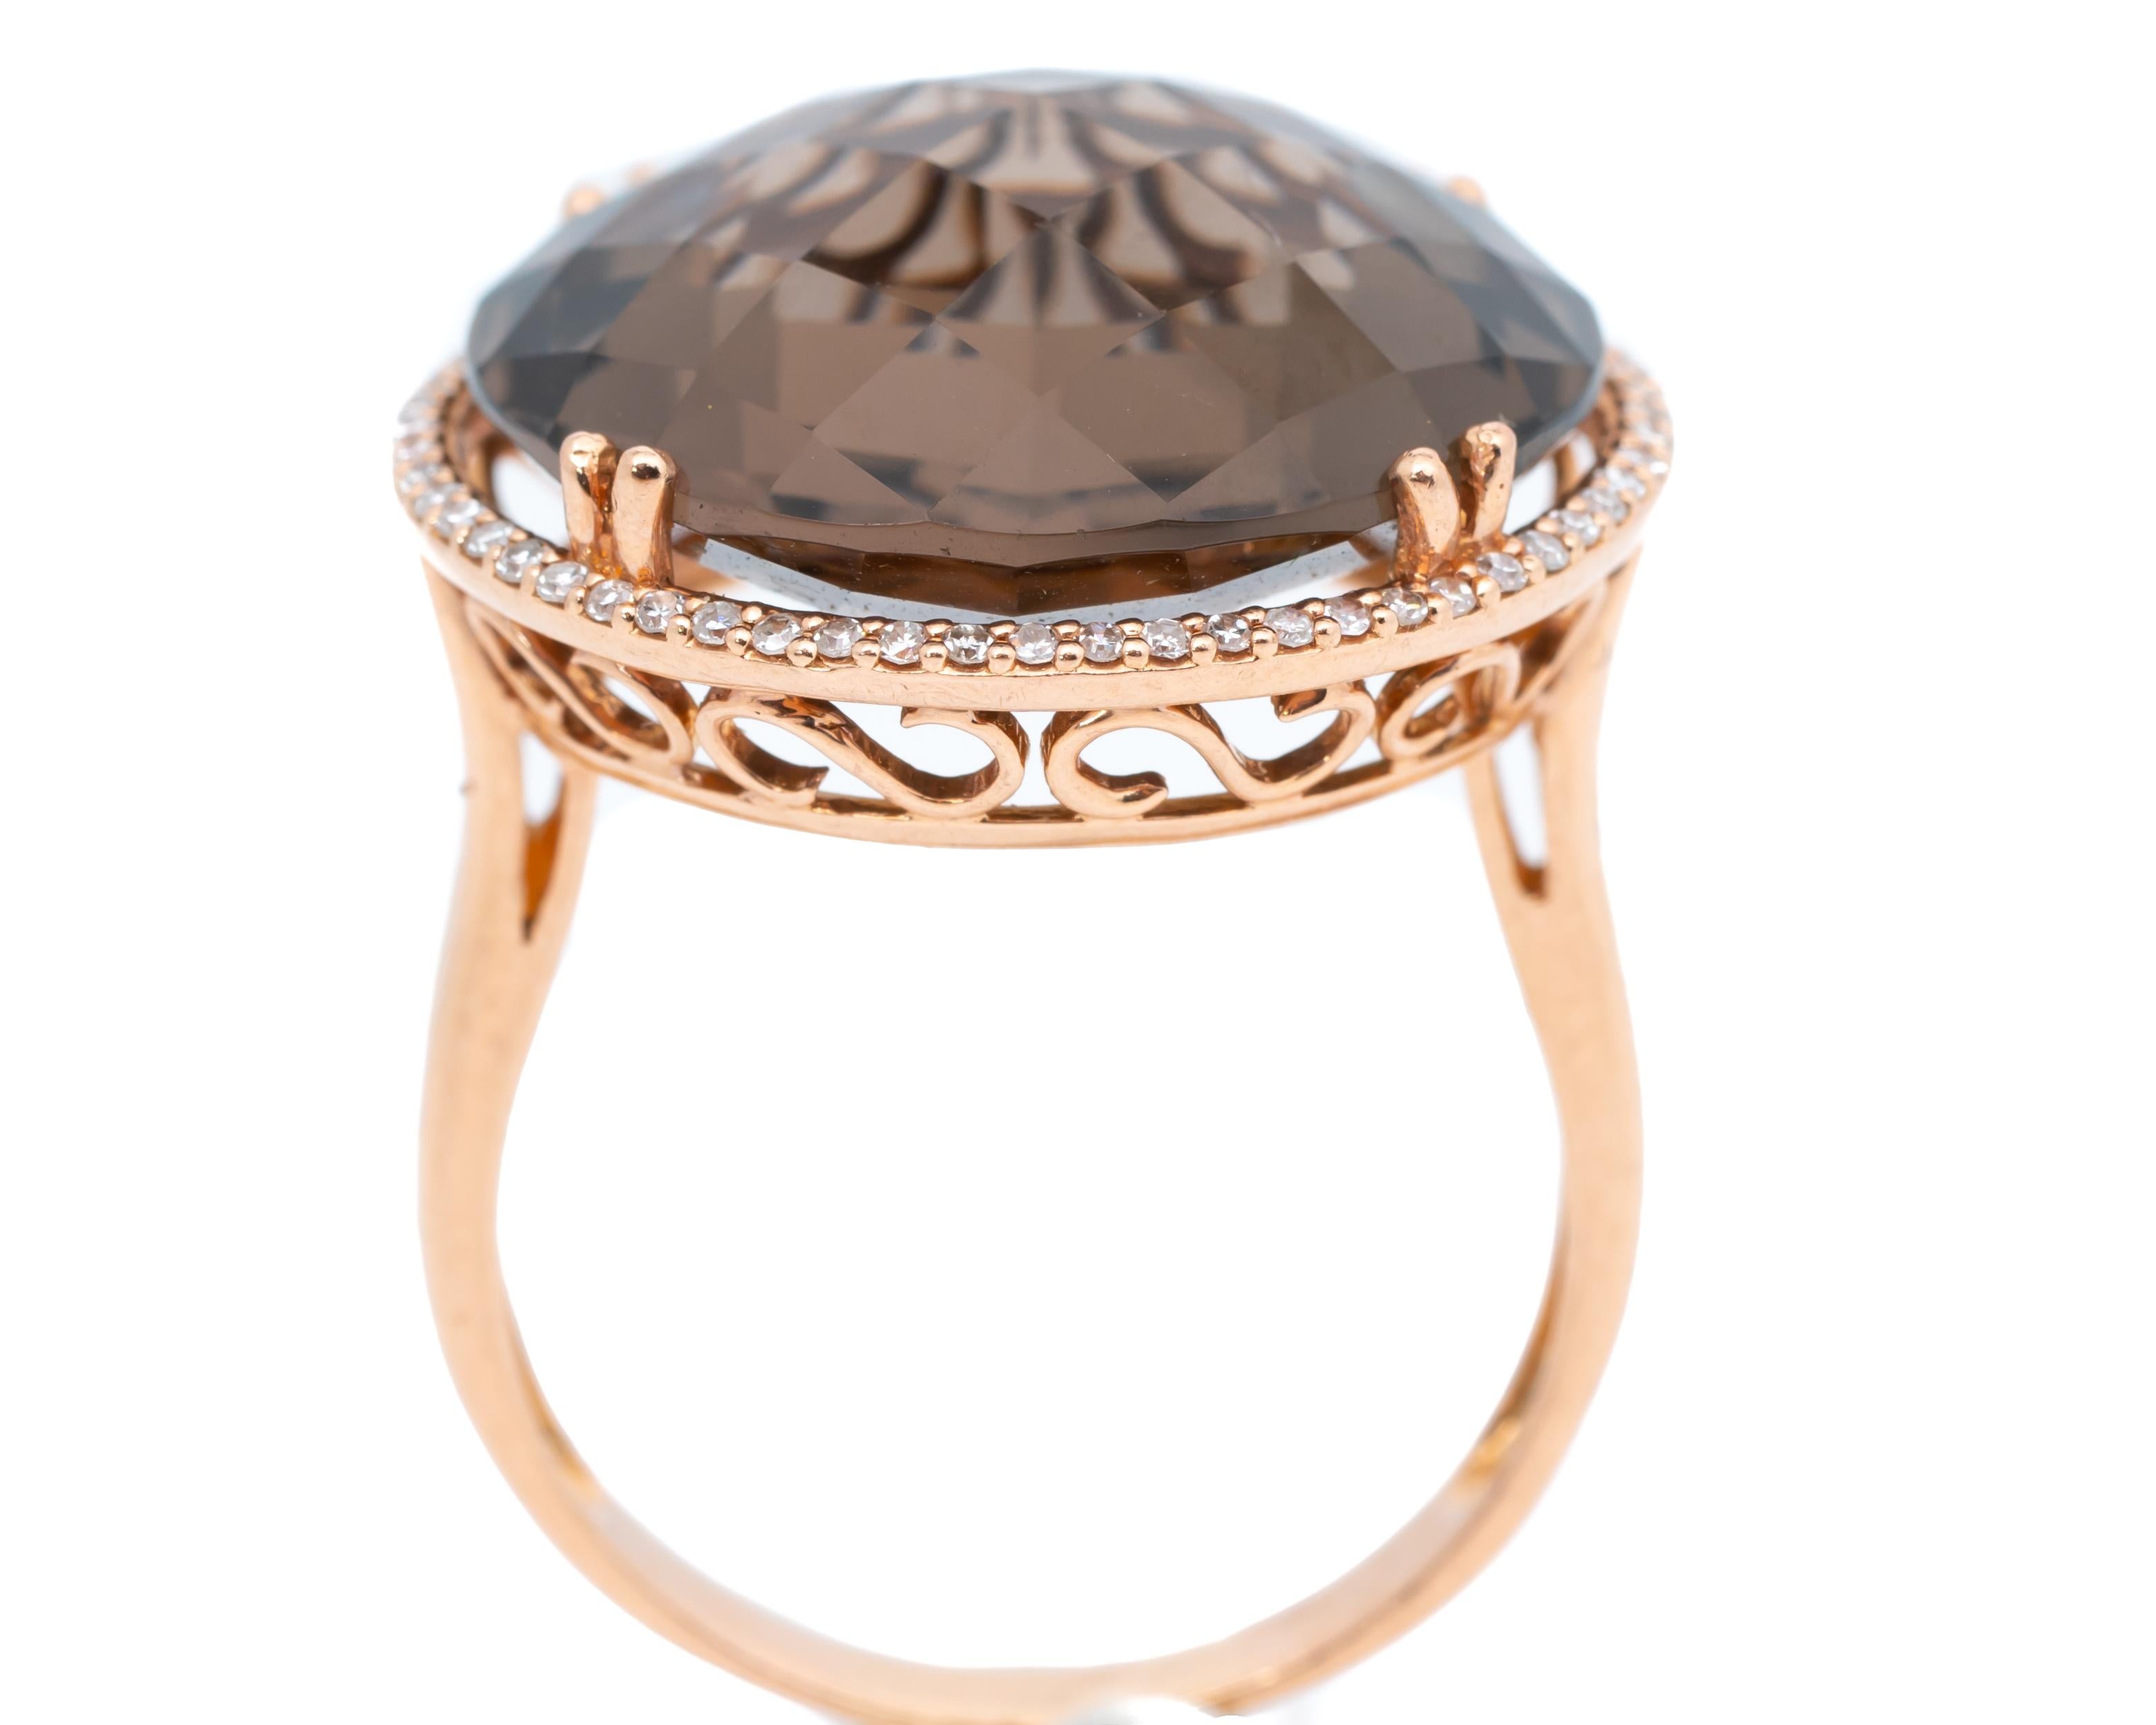 Beautifully crafted 14 karat rose gold ring featuring a stunning 10 carat smokey quartz and accent diamonds from the 1990s

Ring details:
Weight: 8.57g
Gold: 14 Karat rose gold
Size: 8.75 (can be resized)

Quartz Details: 10 Carats, Checkerboard